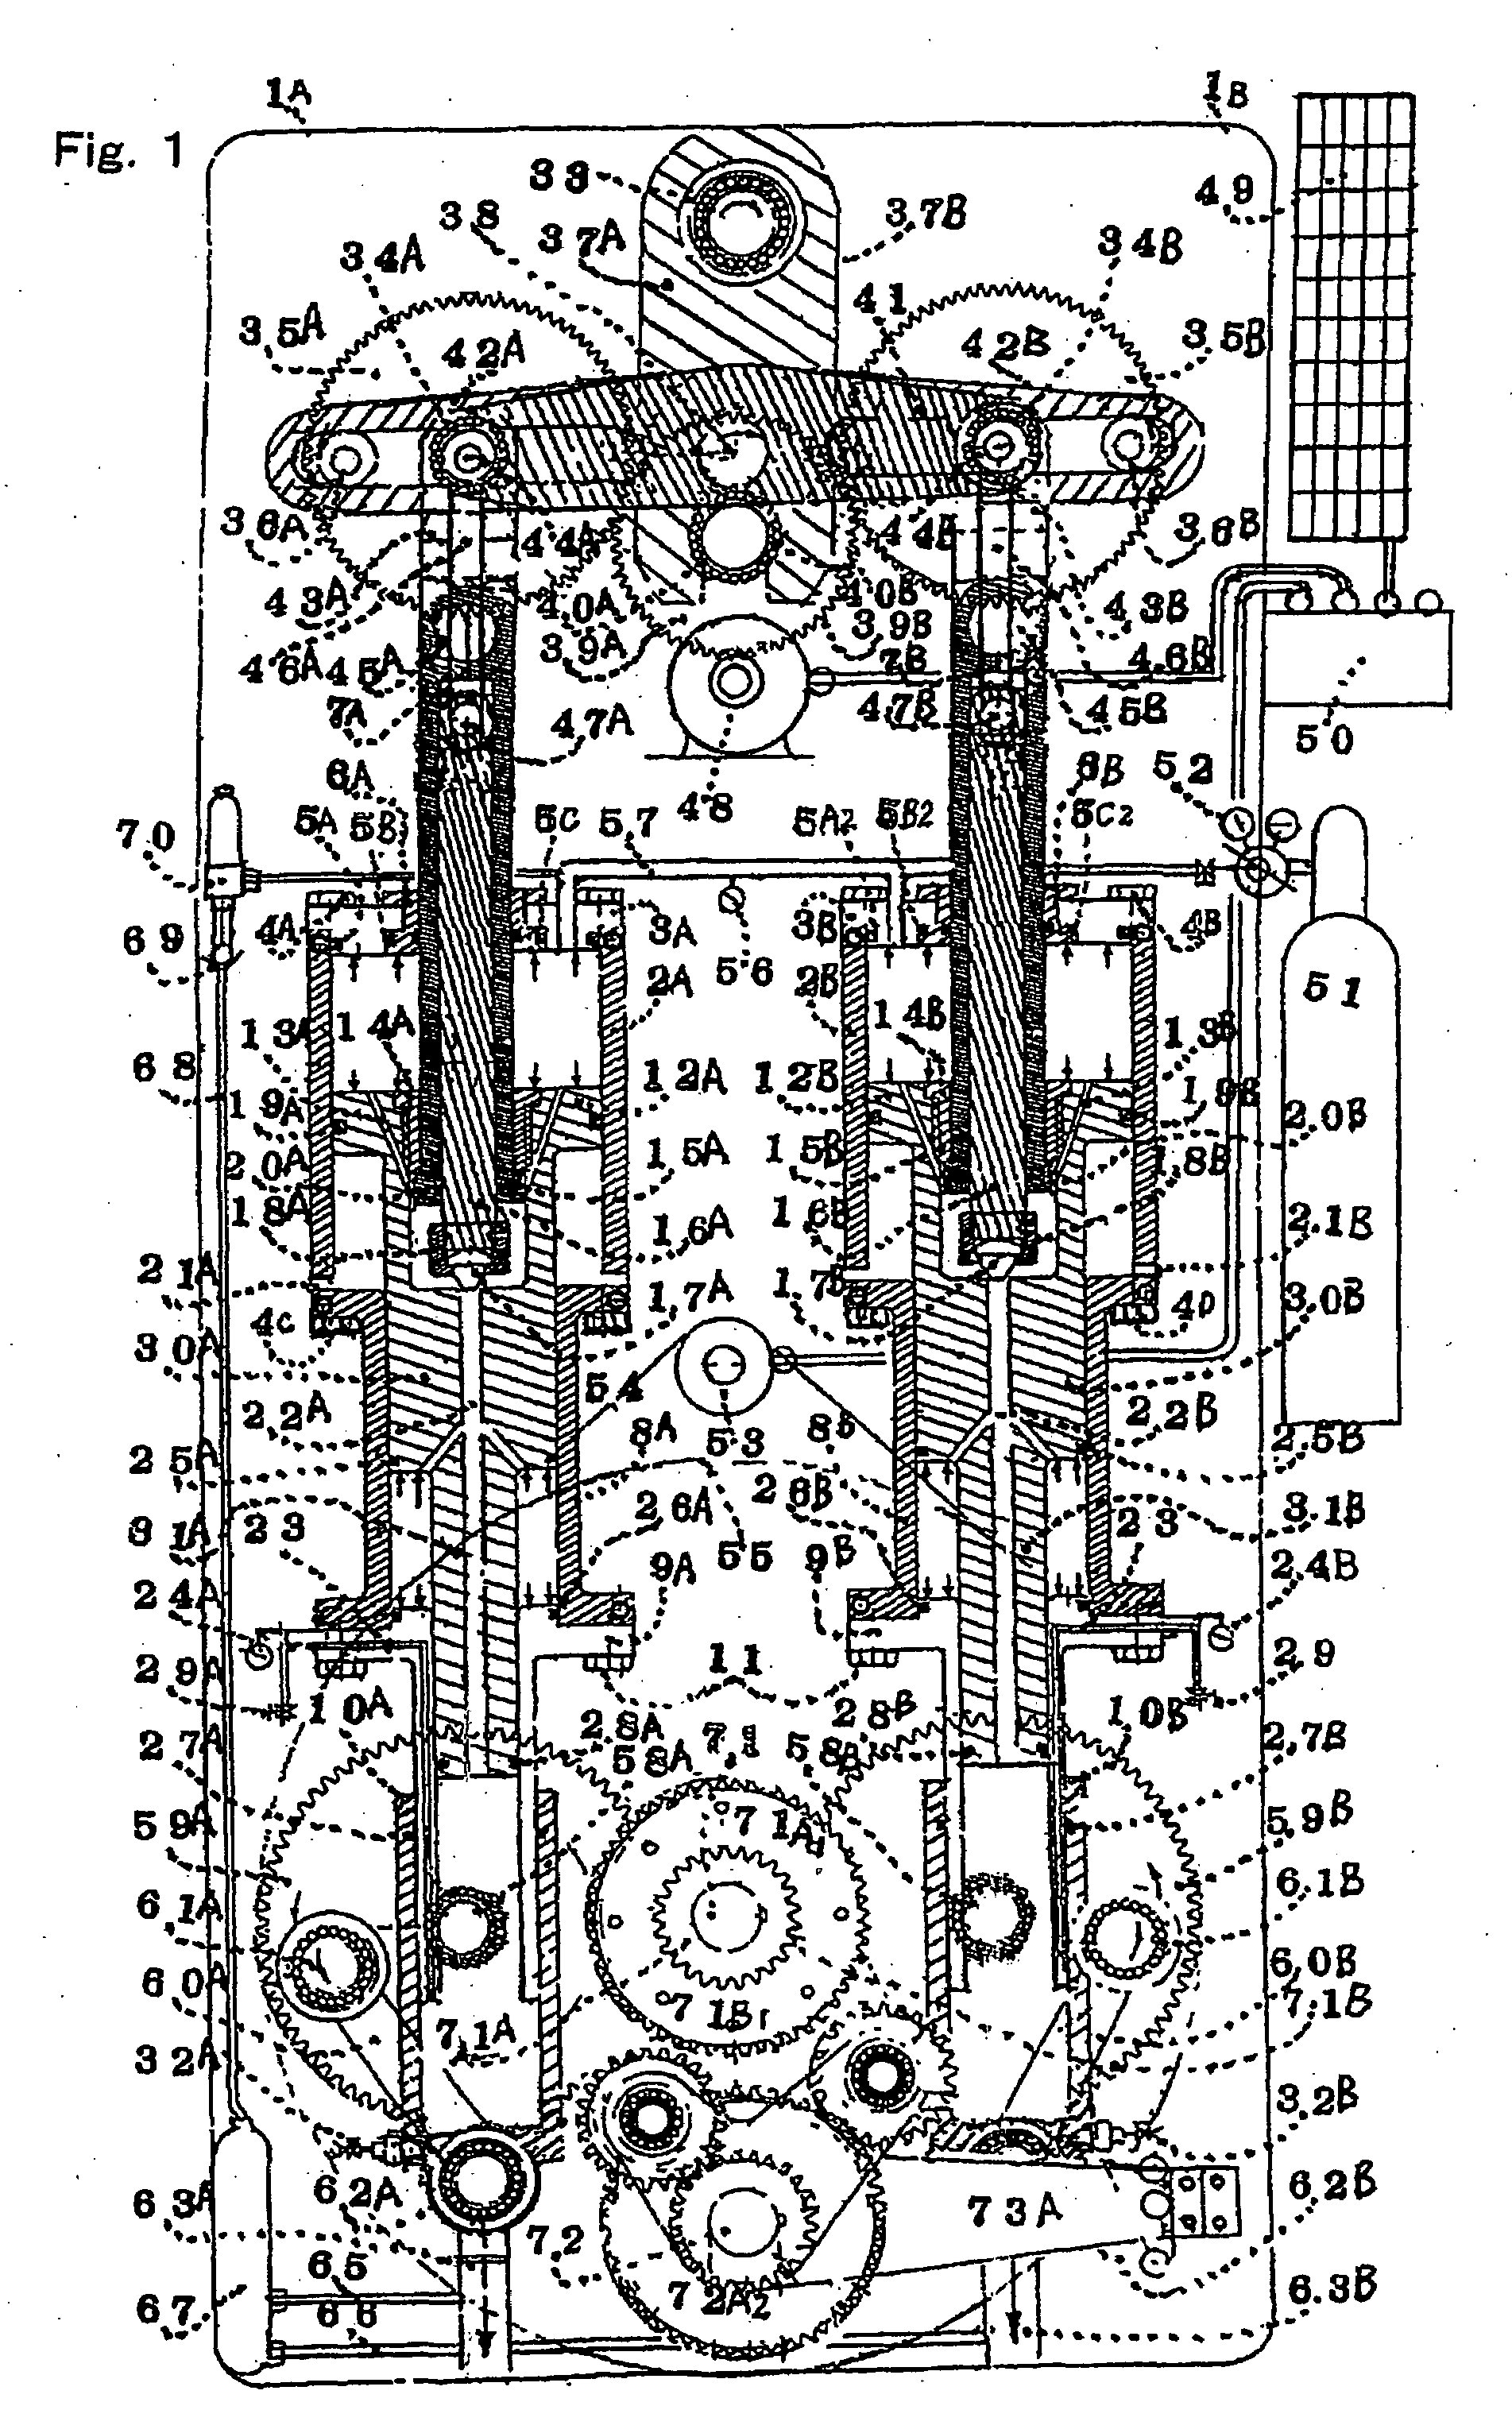 Drive device using charged air pressure